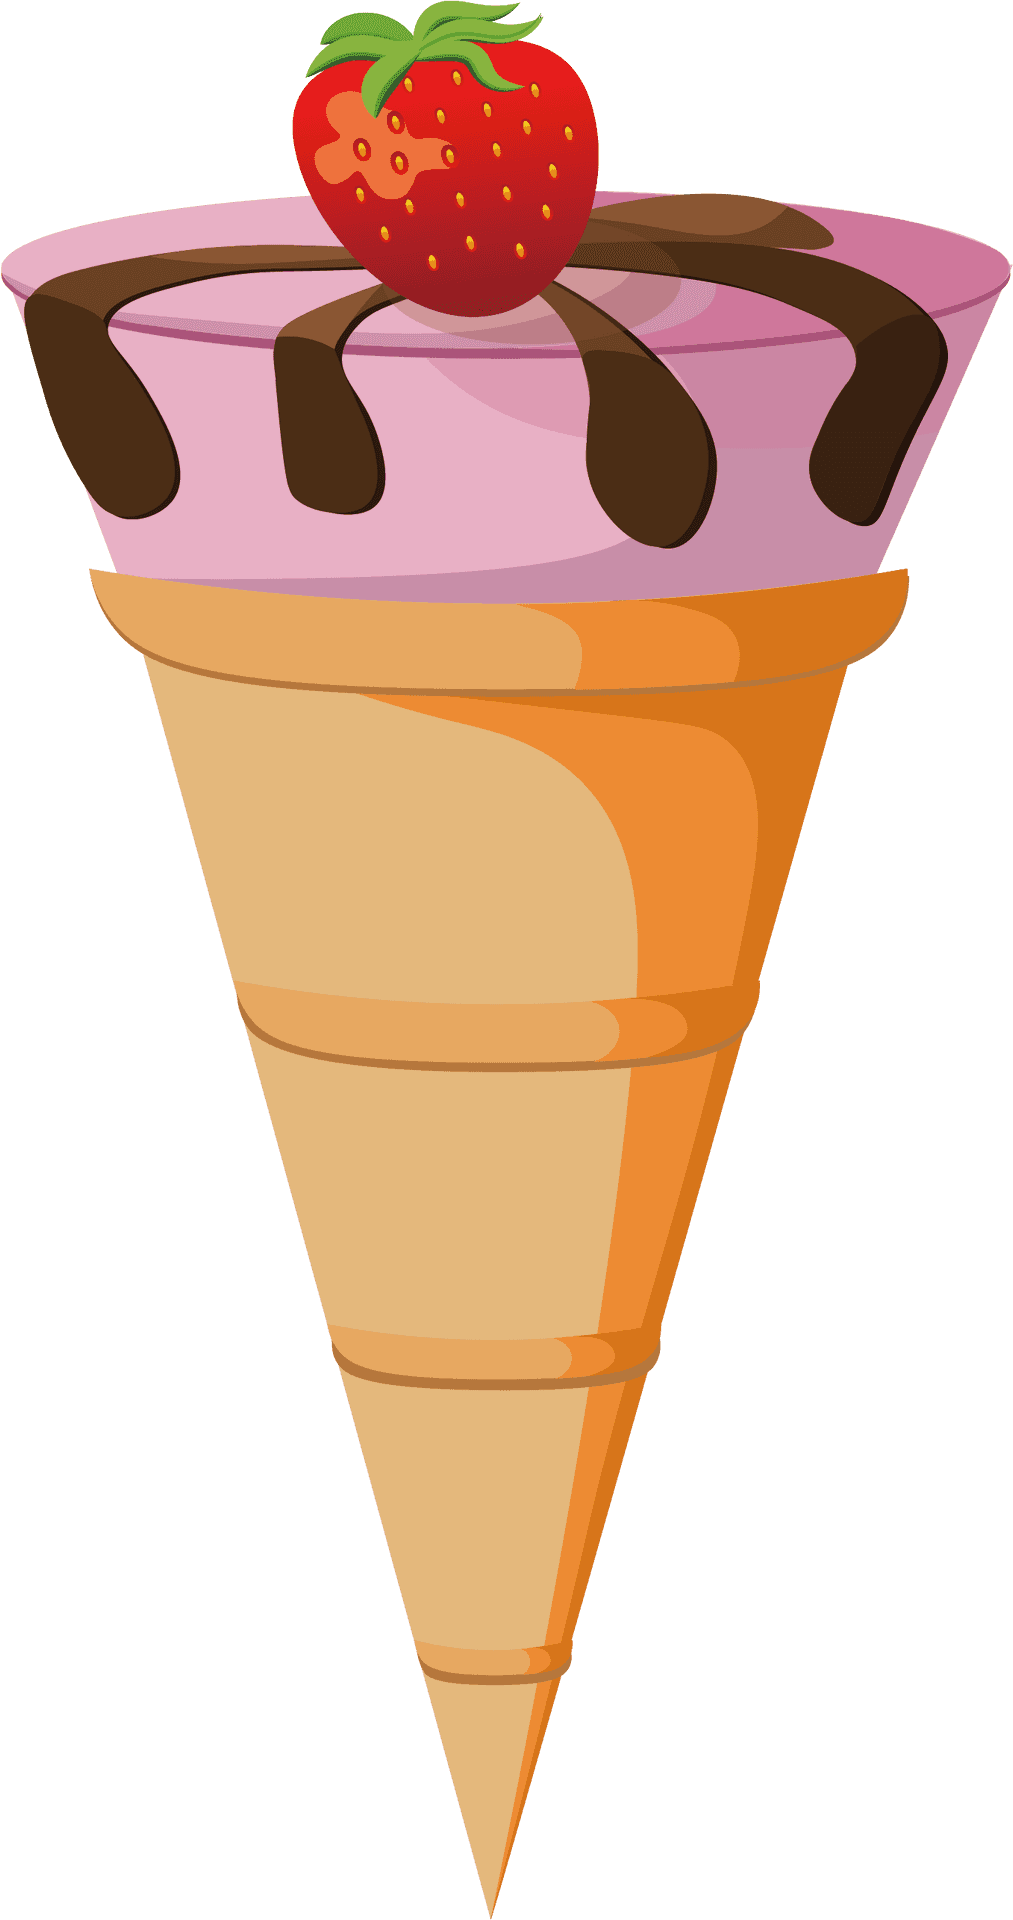 Strawberry Topped Ice Cream Cone Illustration PNG